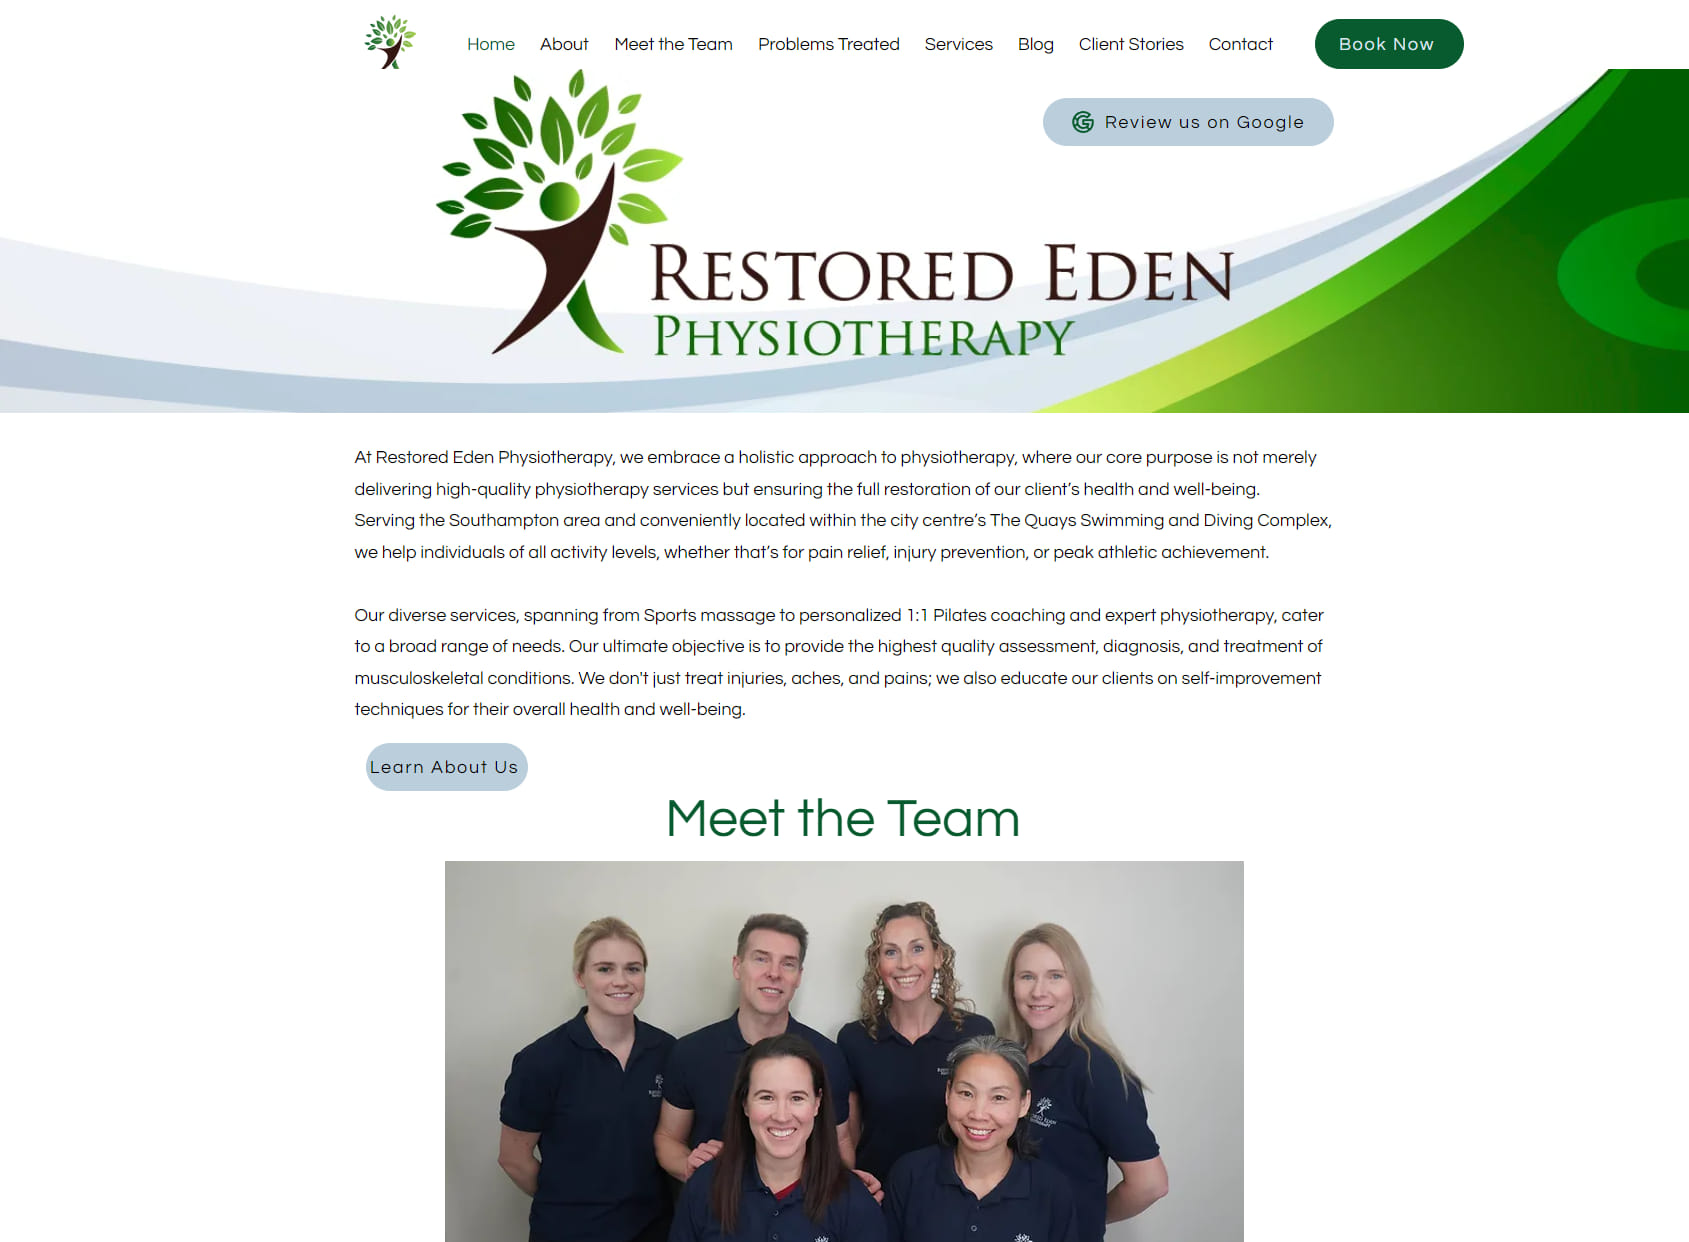 Restored Eden Physiotherapy